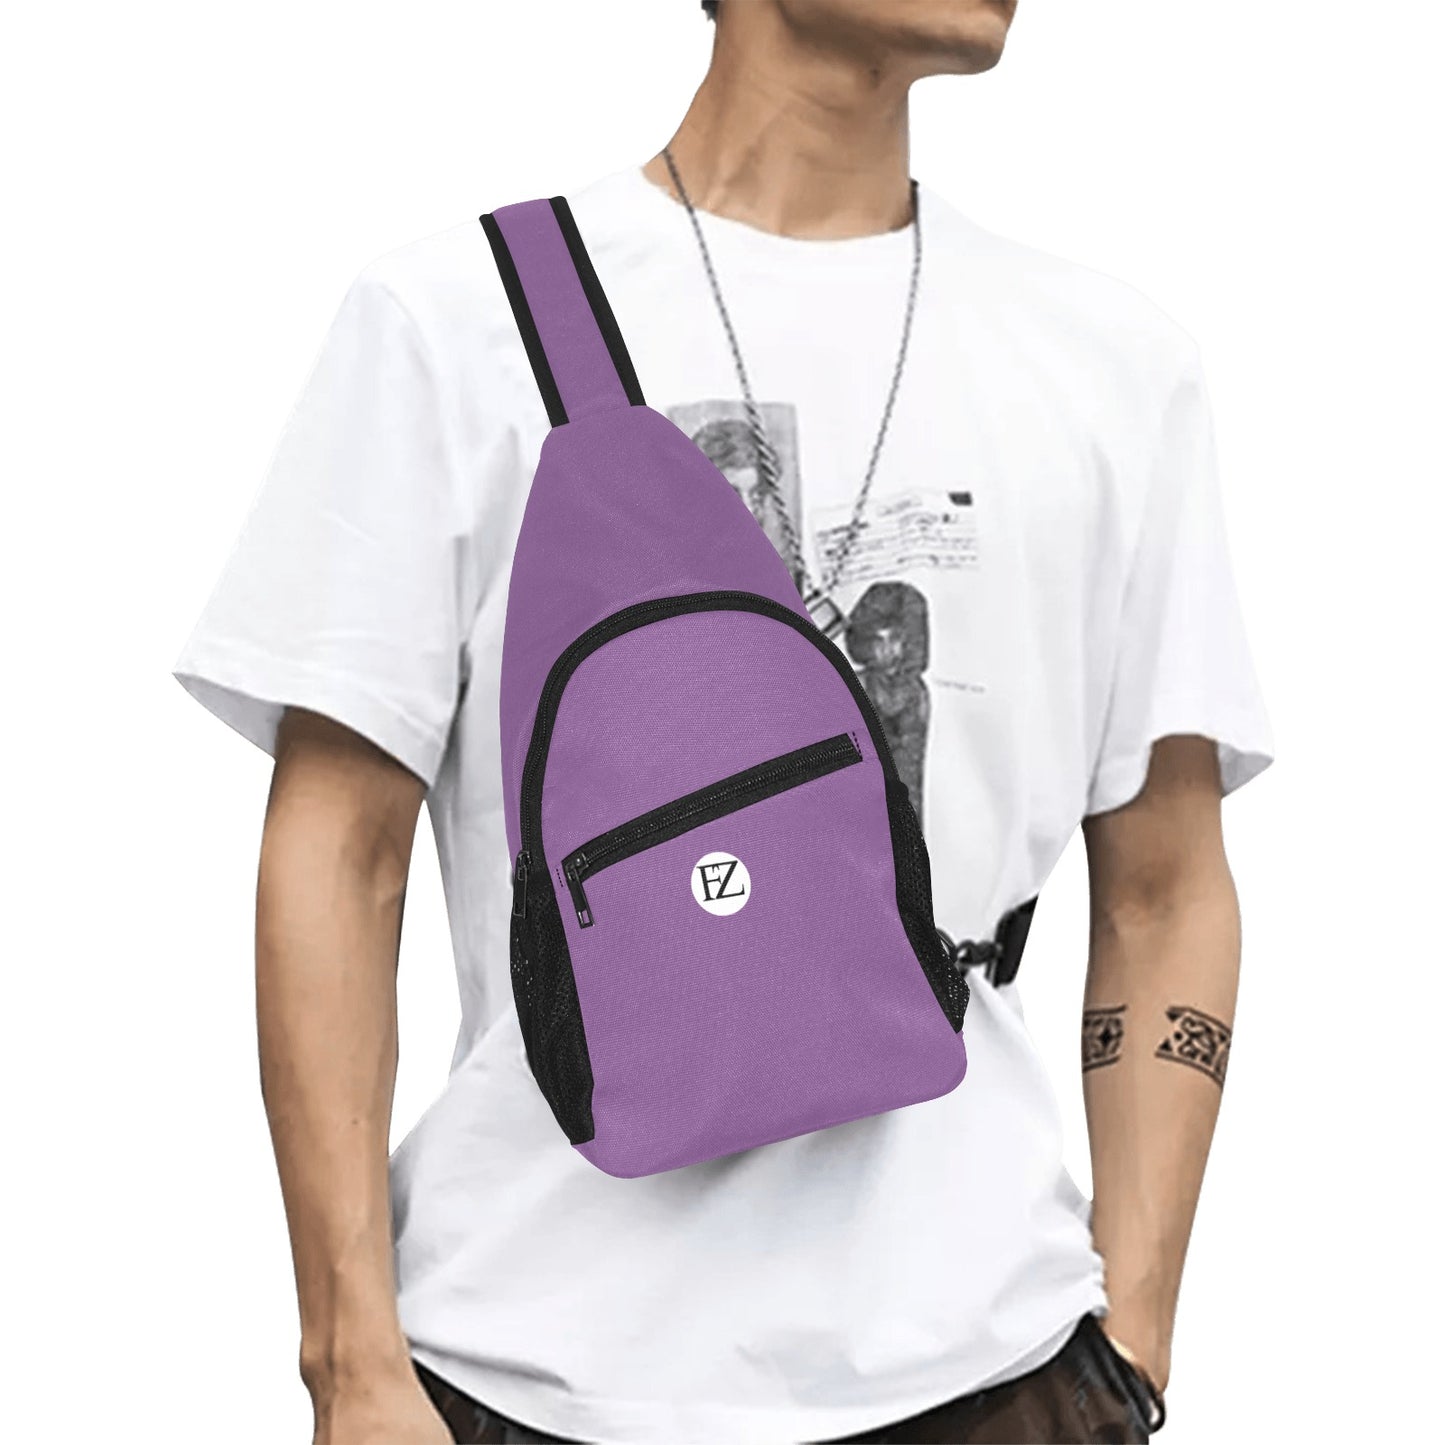 fz men's chest bag too one size / fz chest bag-purple all over print chest bag(model1719)